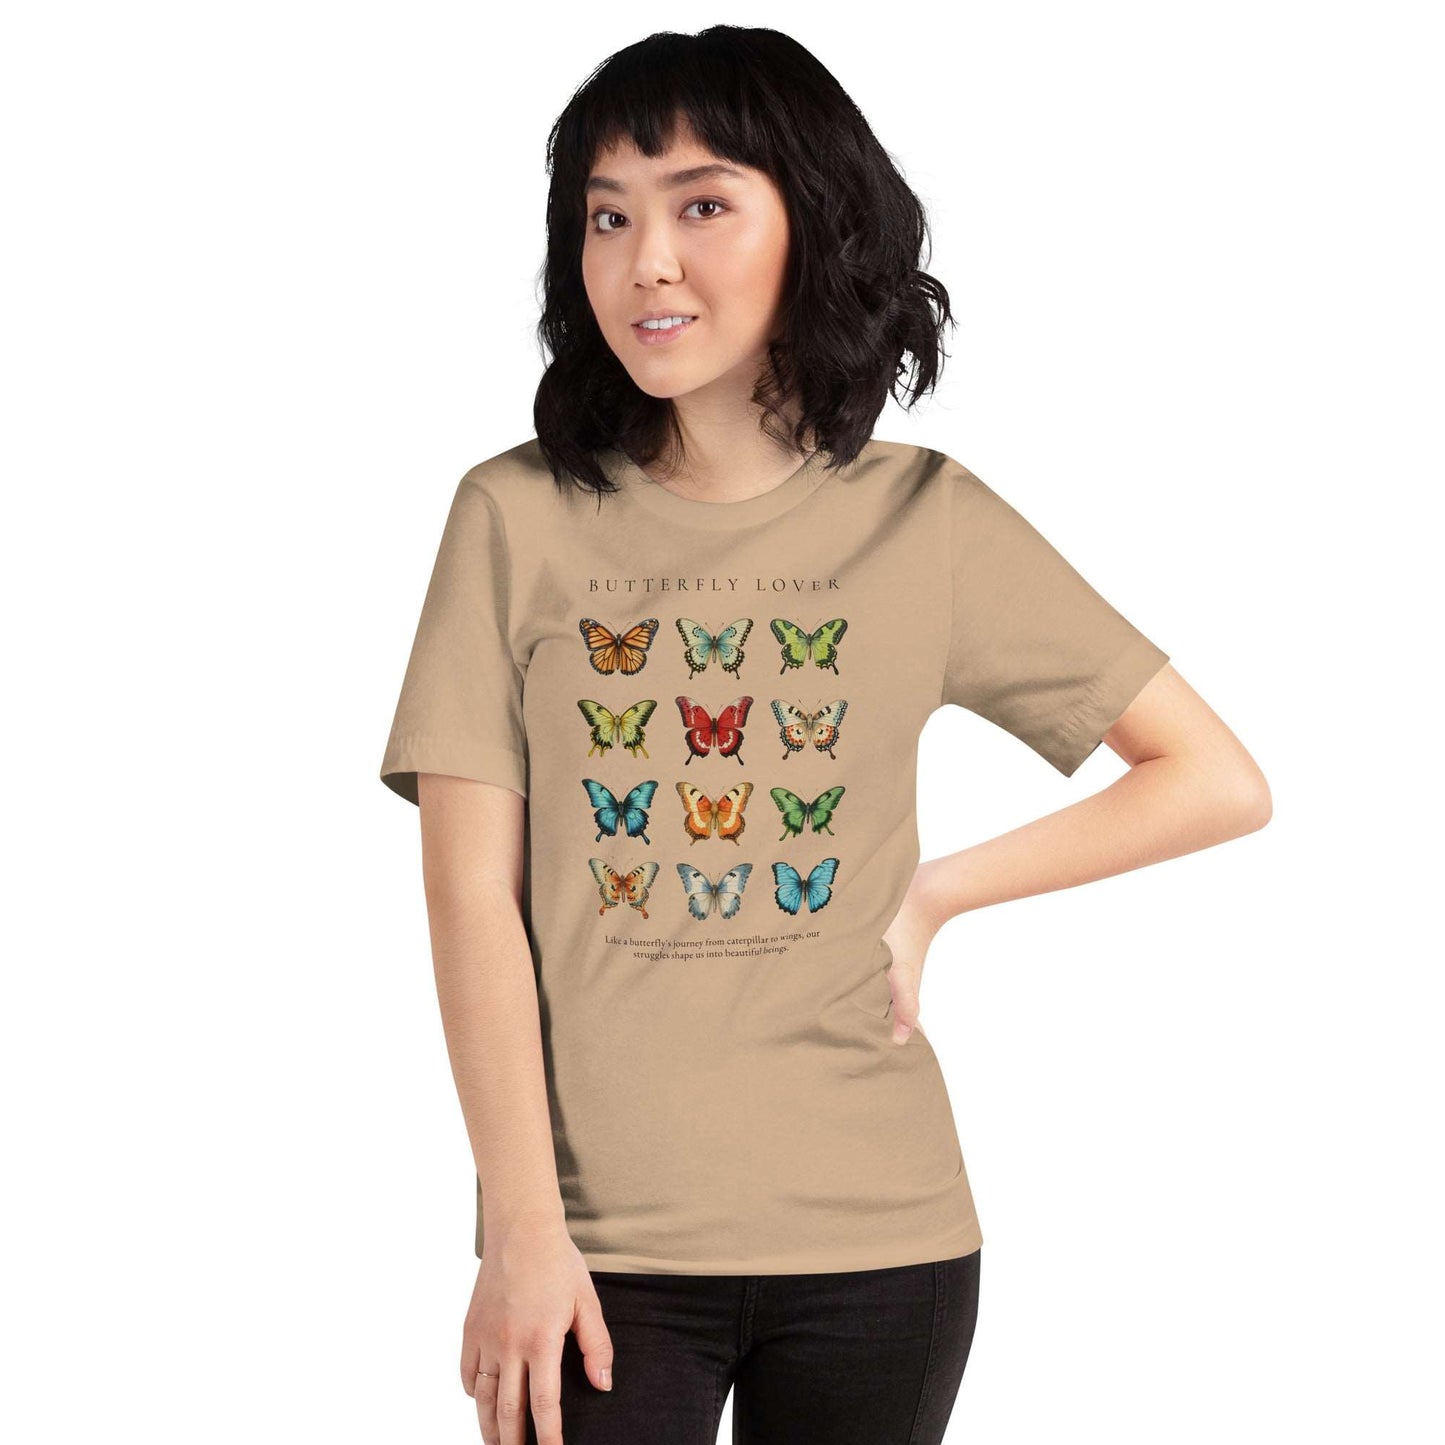 A BM TEE Butterfly Lover Graphic t-shirt